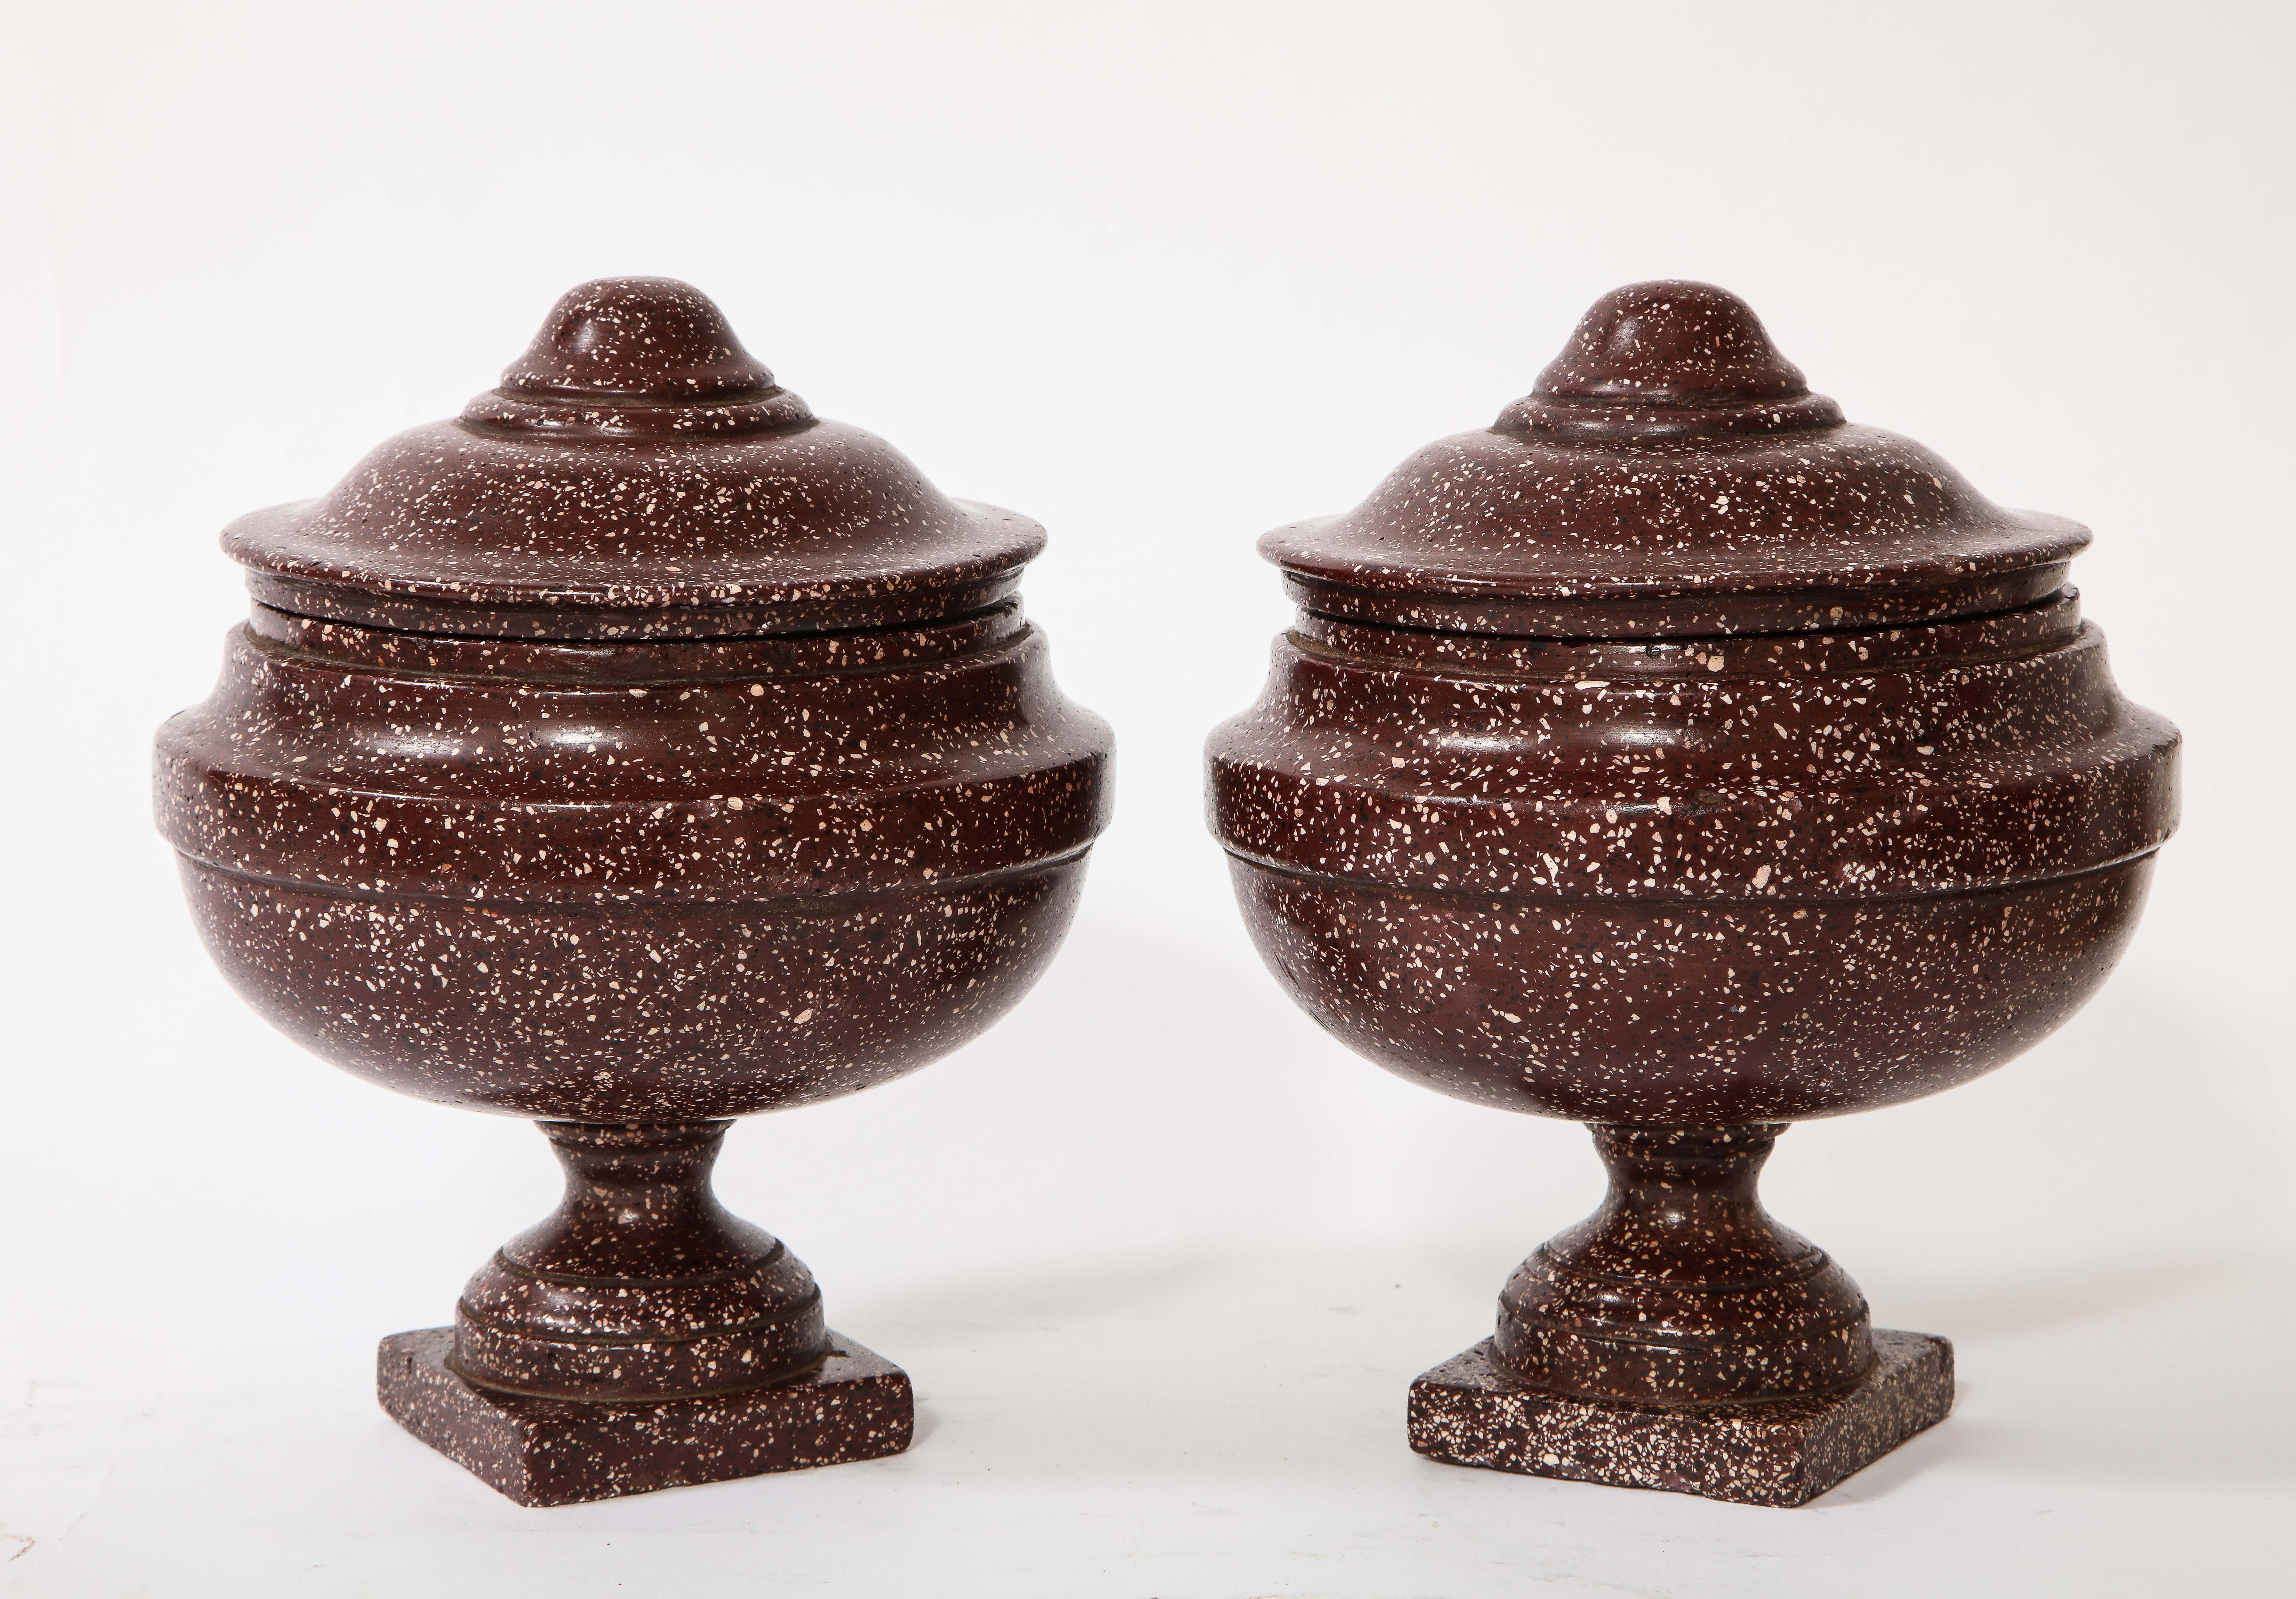 A very fine pair of antique roman porphyry, Grand Tour period hand carved lidded vases. These are a fabulous and quite decorative pair of porphyry lidded urns or vases. They are very well hand carved and hand-polished with variable stepped levels